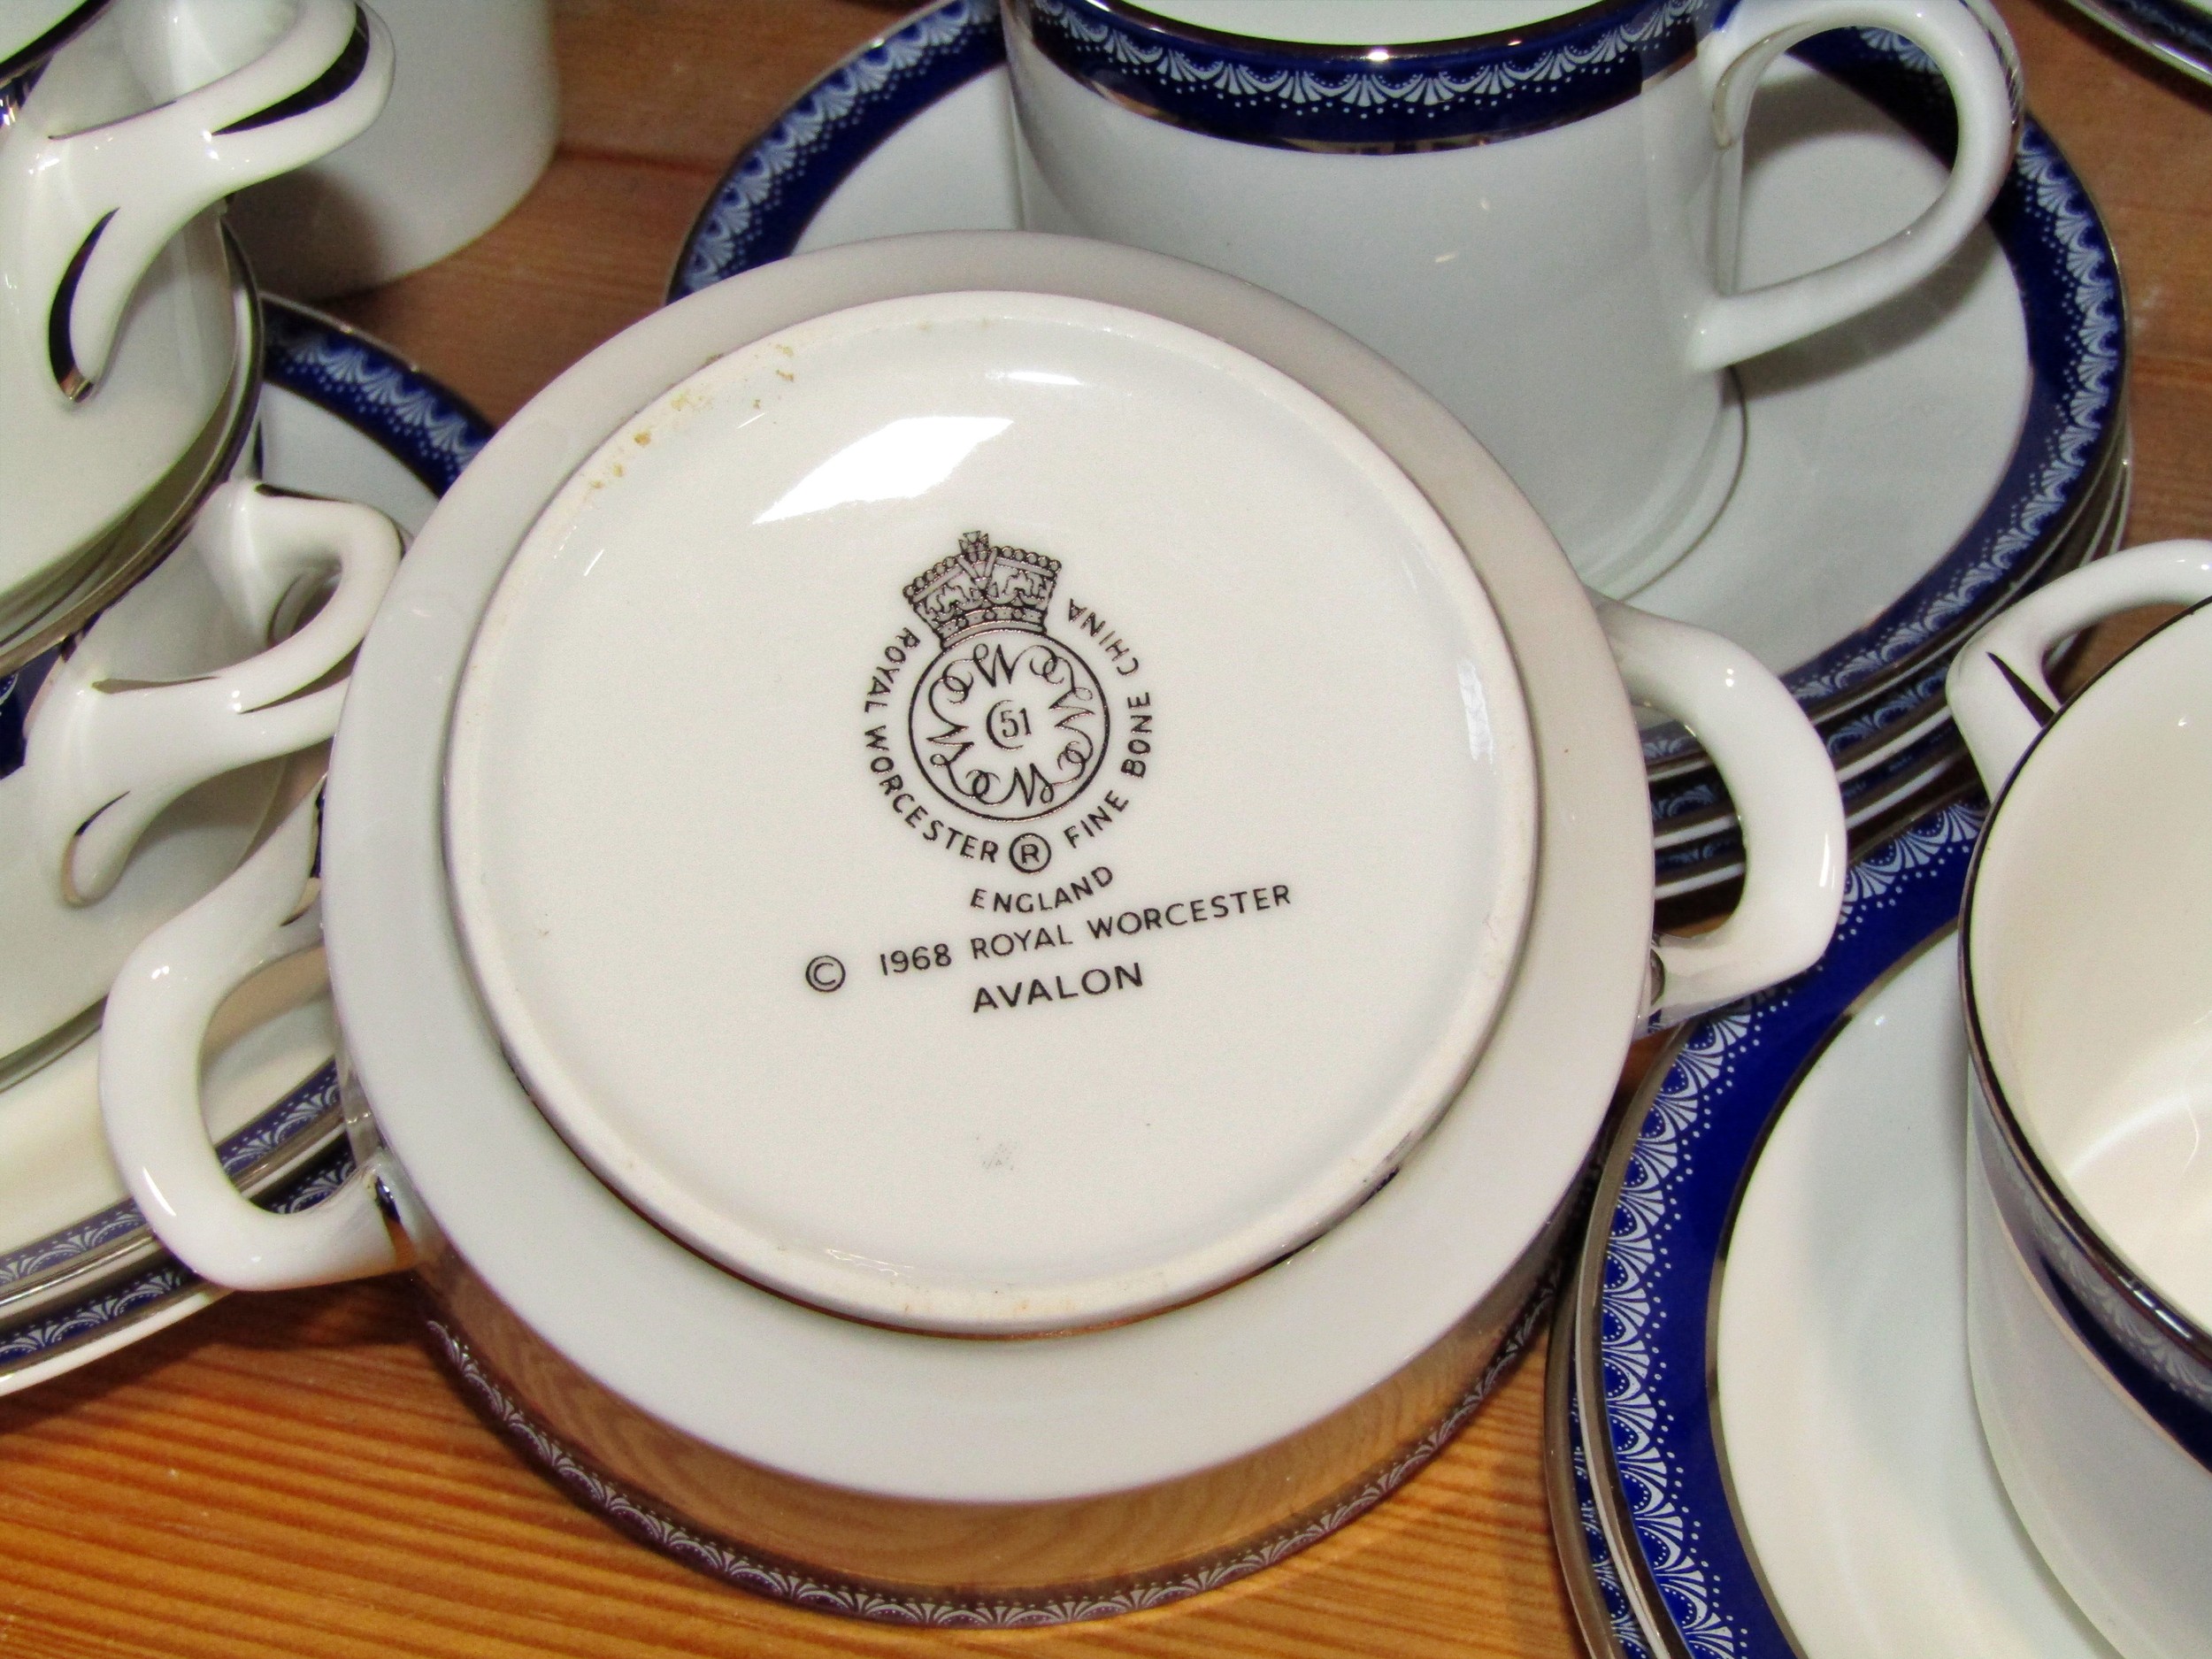 A collection of Royal Worcester Avalon dinnerware comprising dinner plates, side plates, tureens, - Image 4 of 6